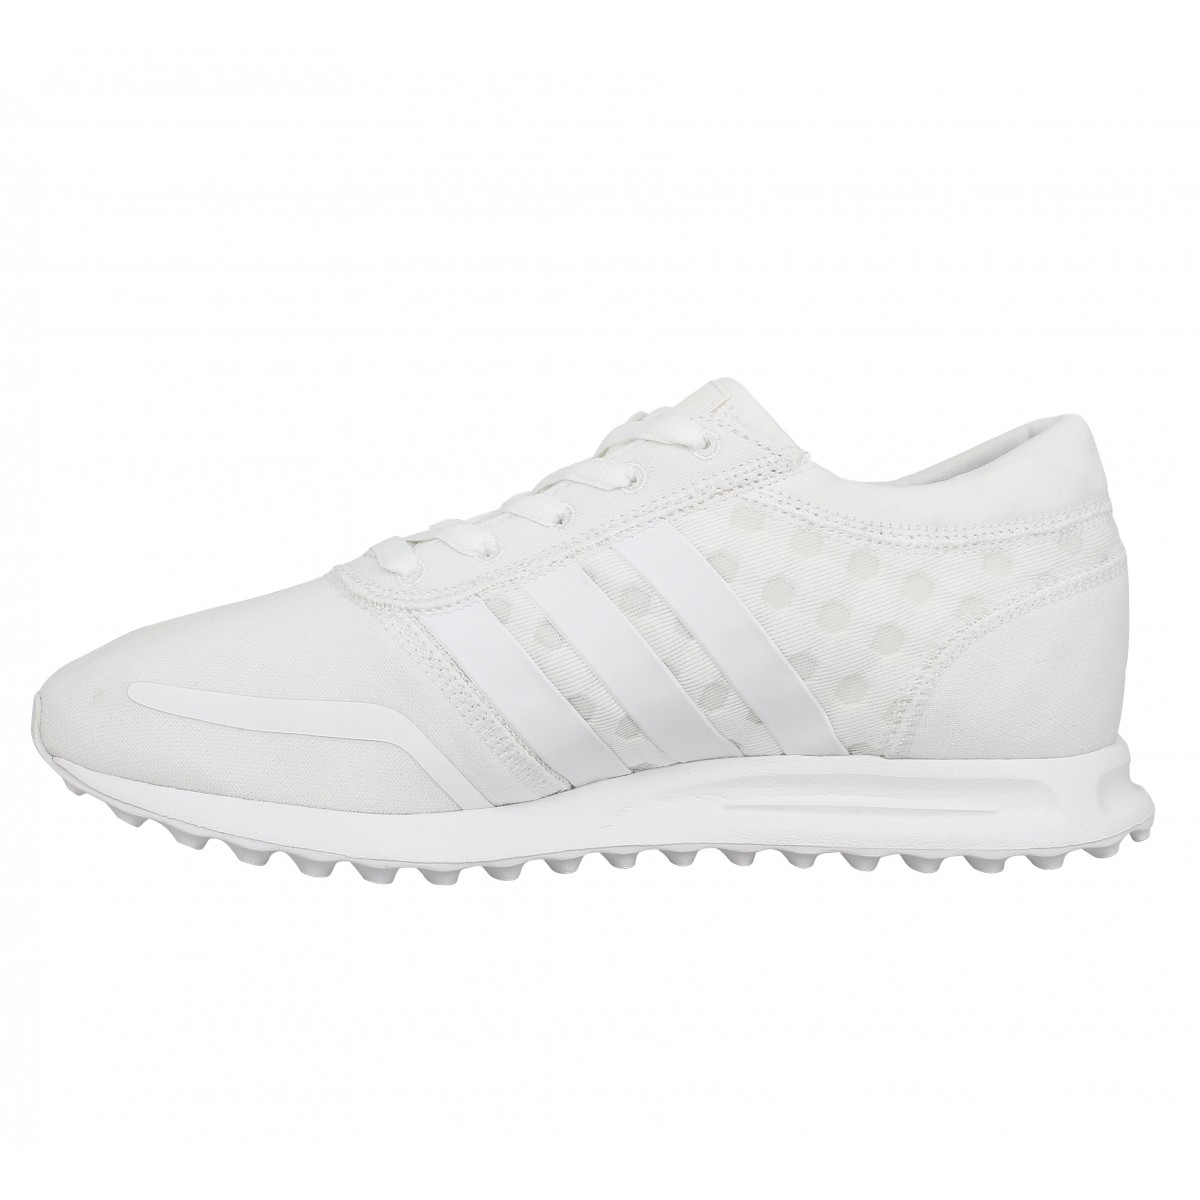 Adidas los angeles pois blanc femme | Fanny chaussures